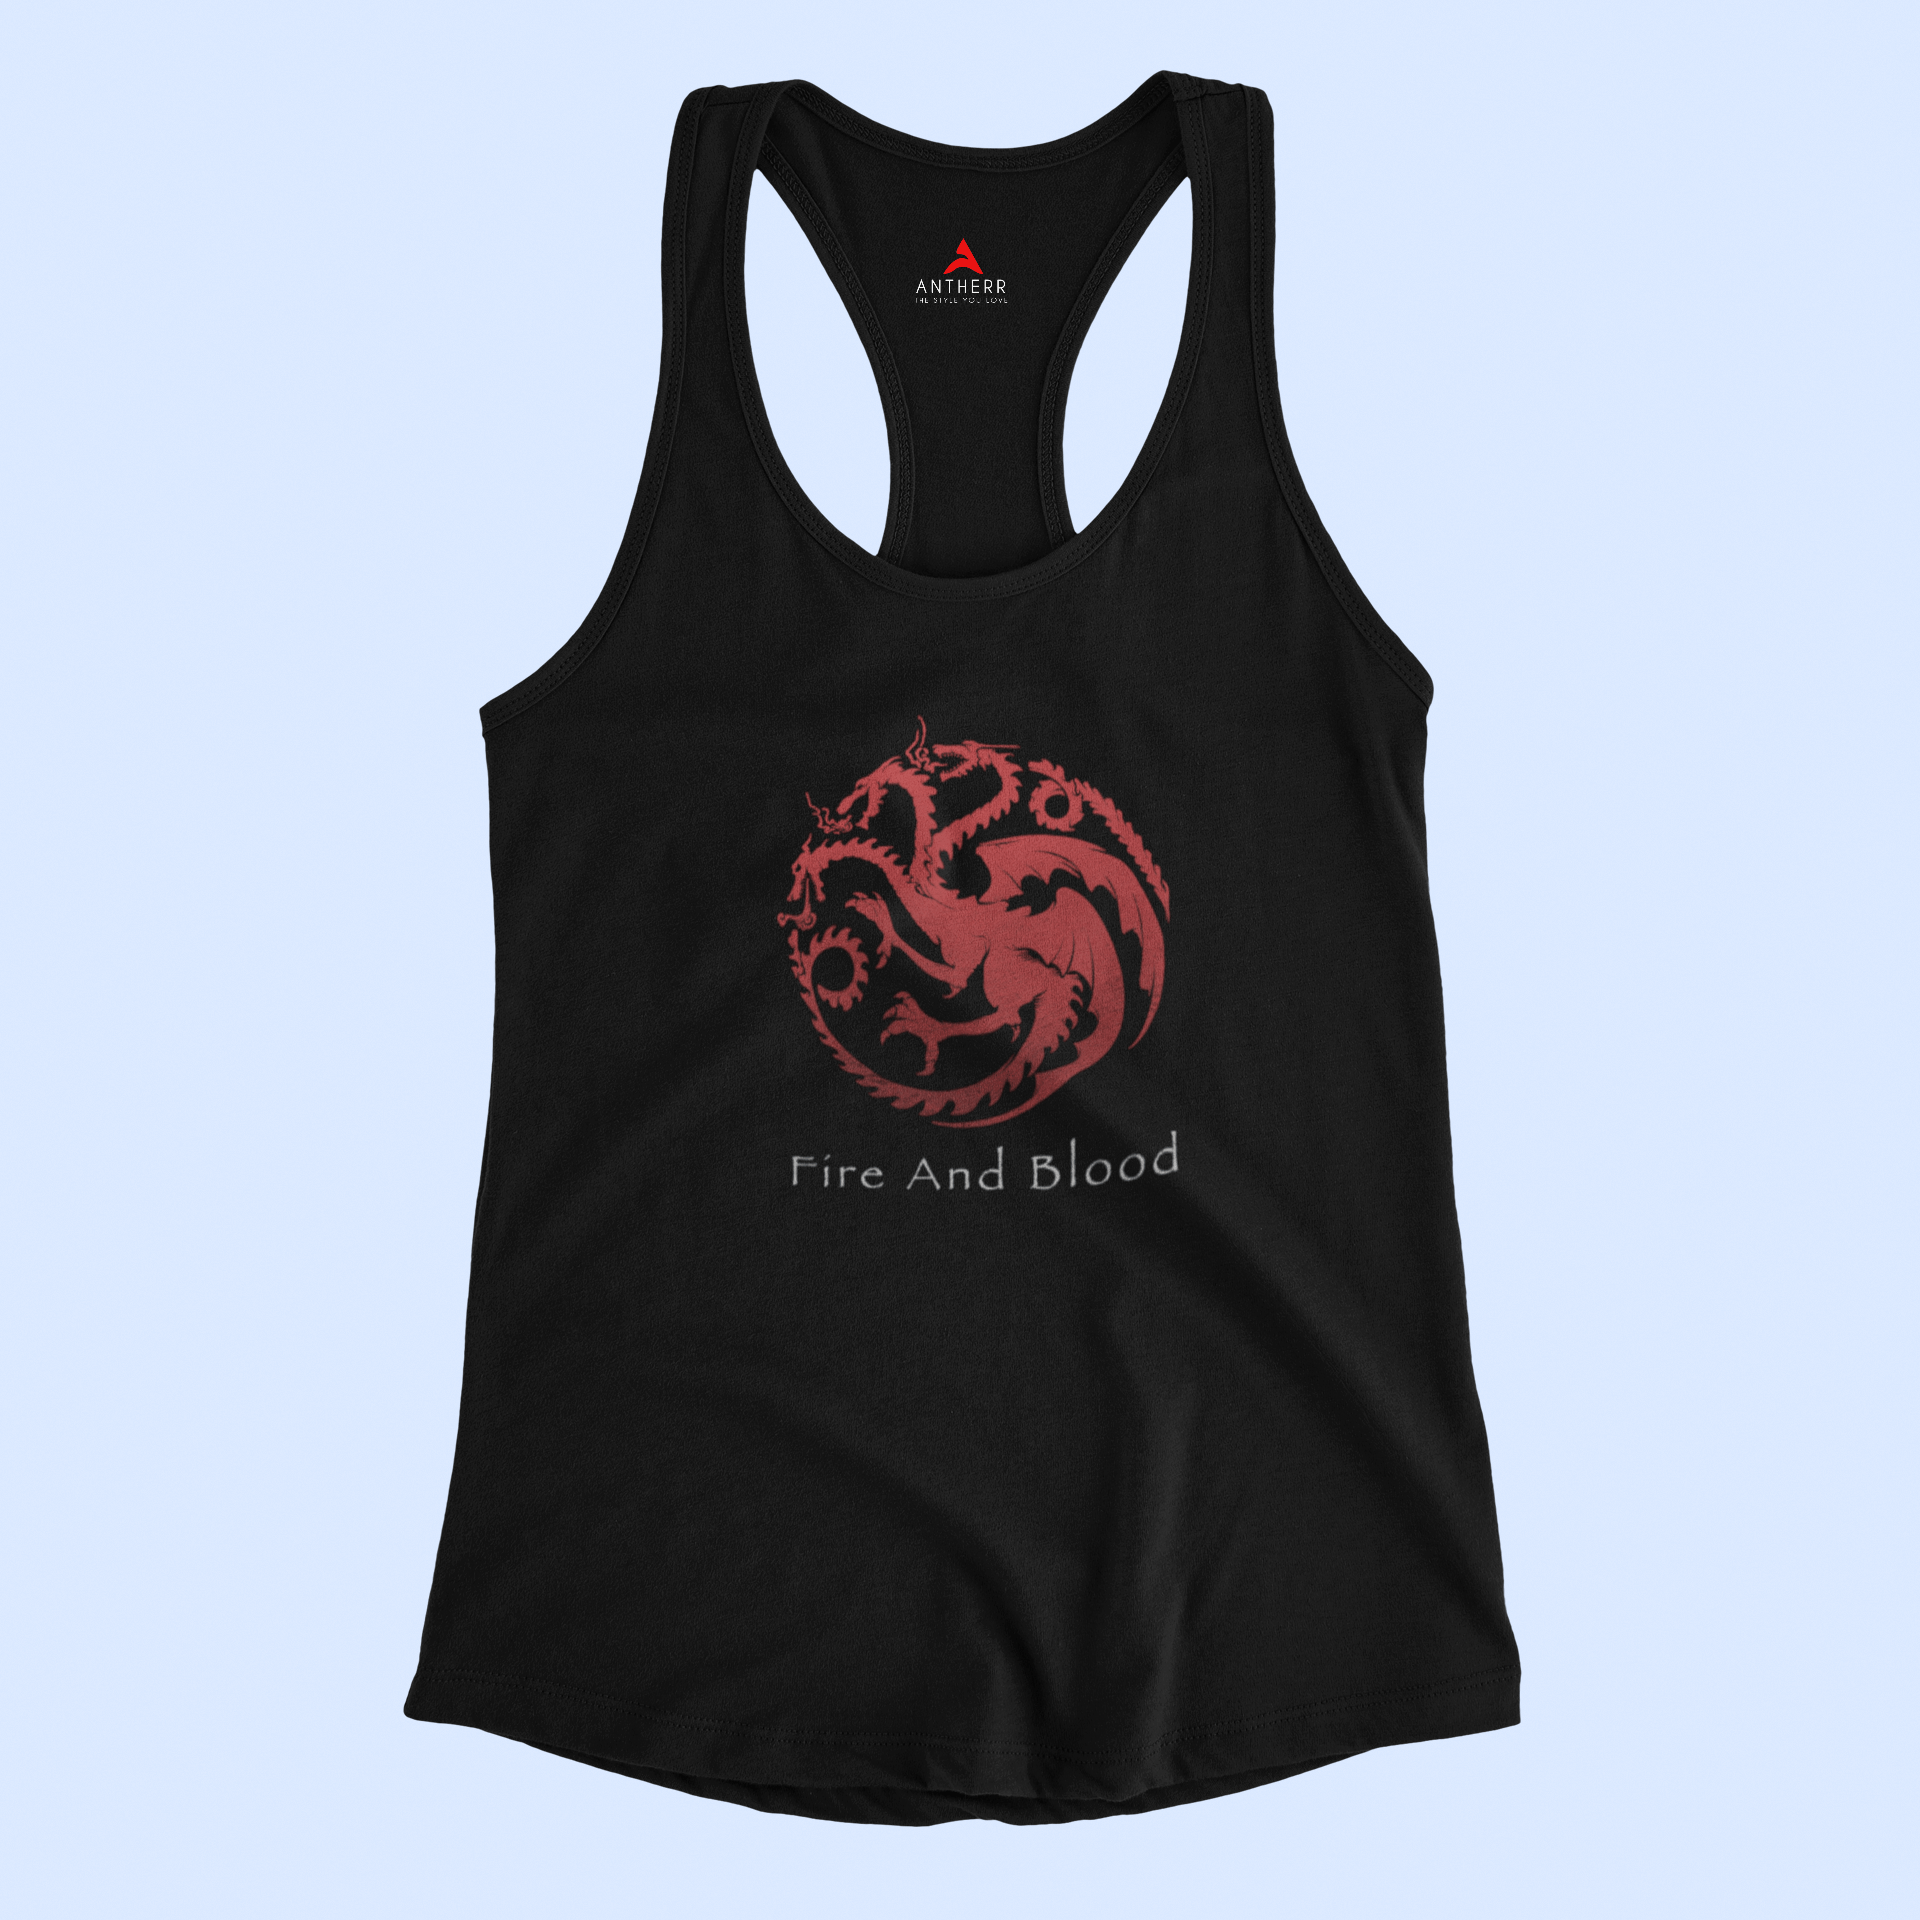 BLOOD AND FIRE - GAME OF THRONES :Tank Tops